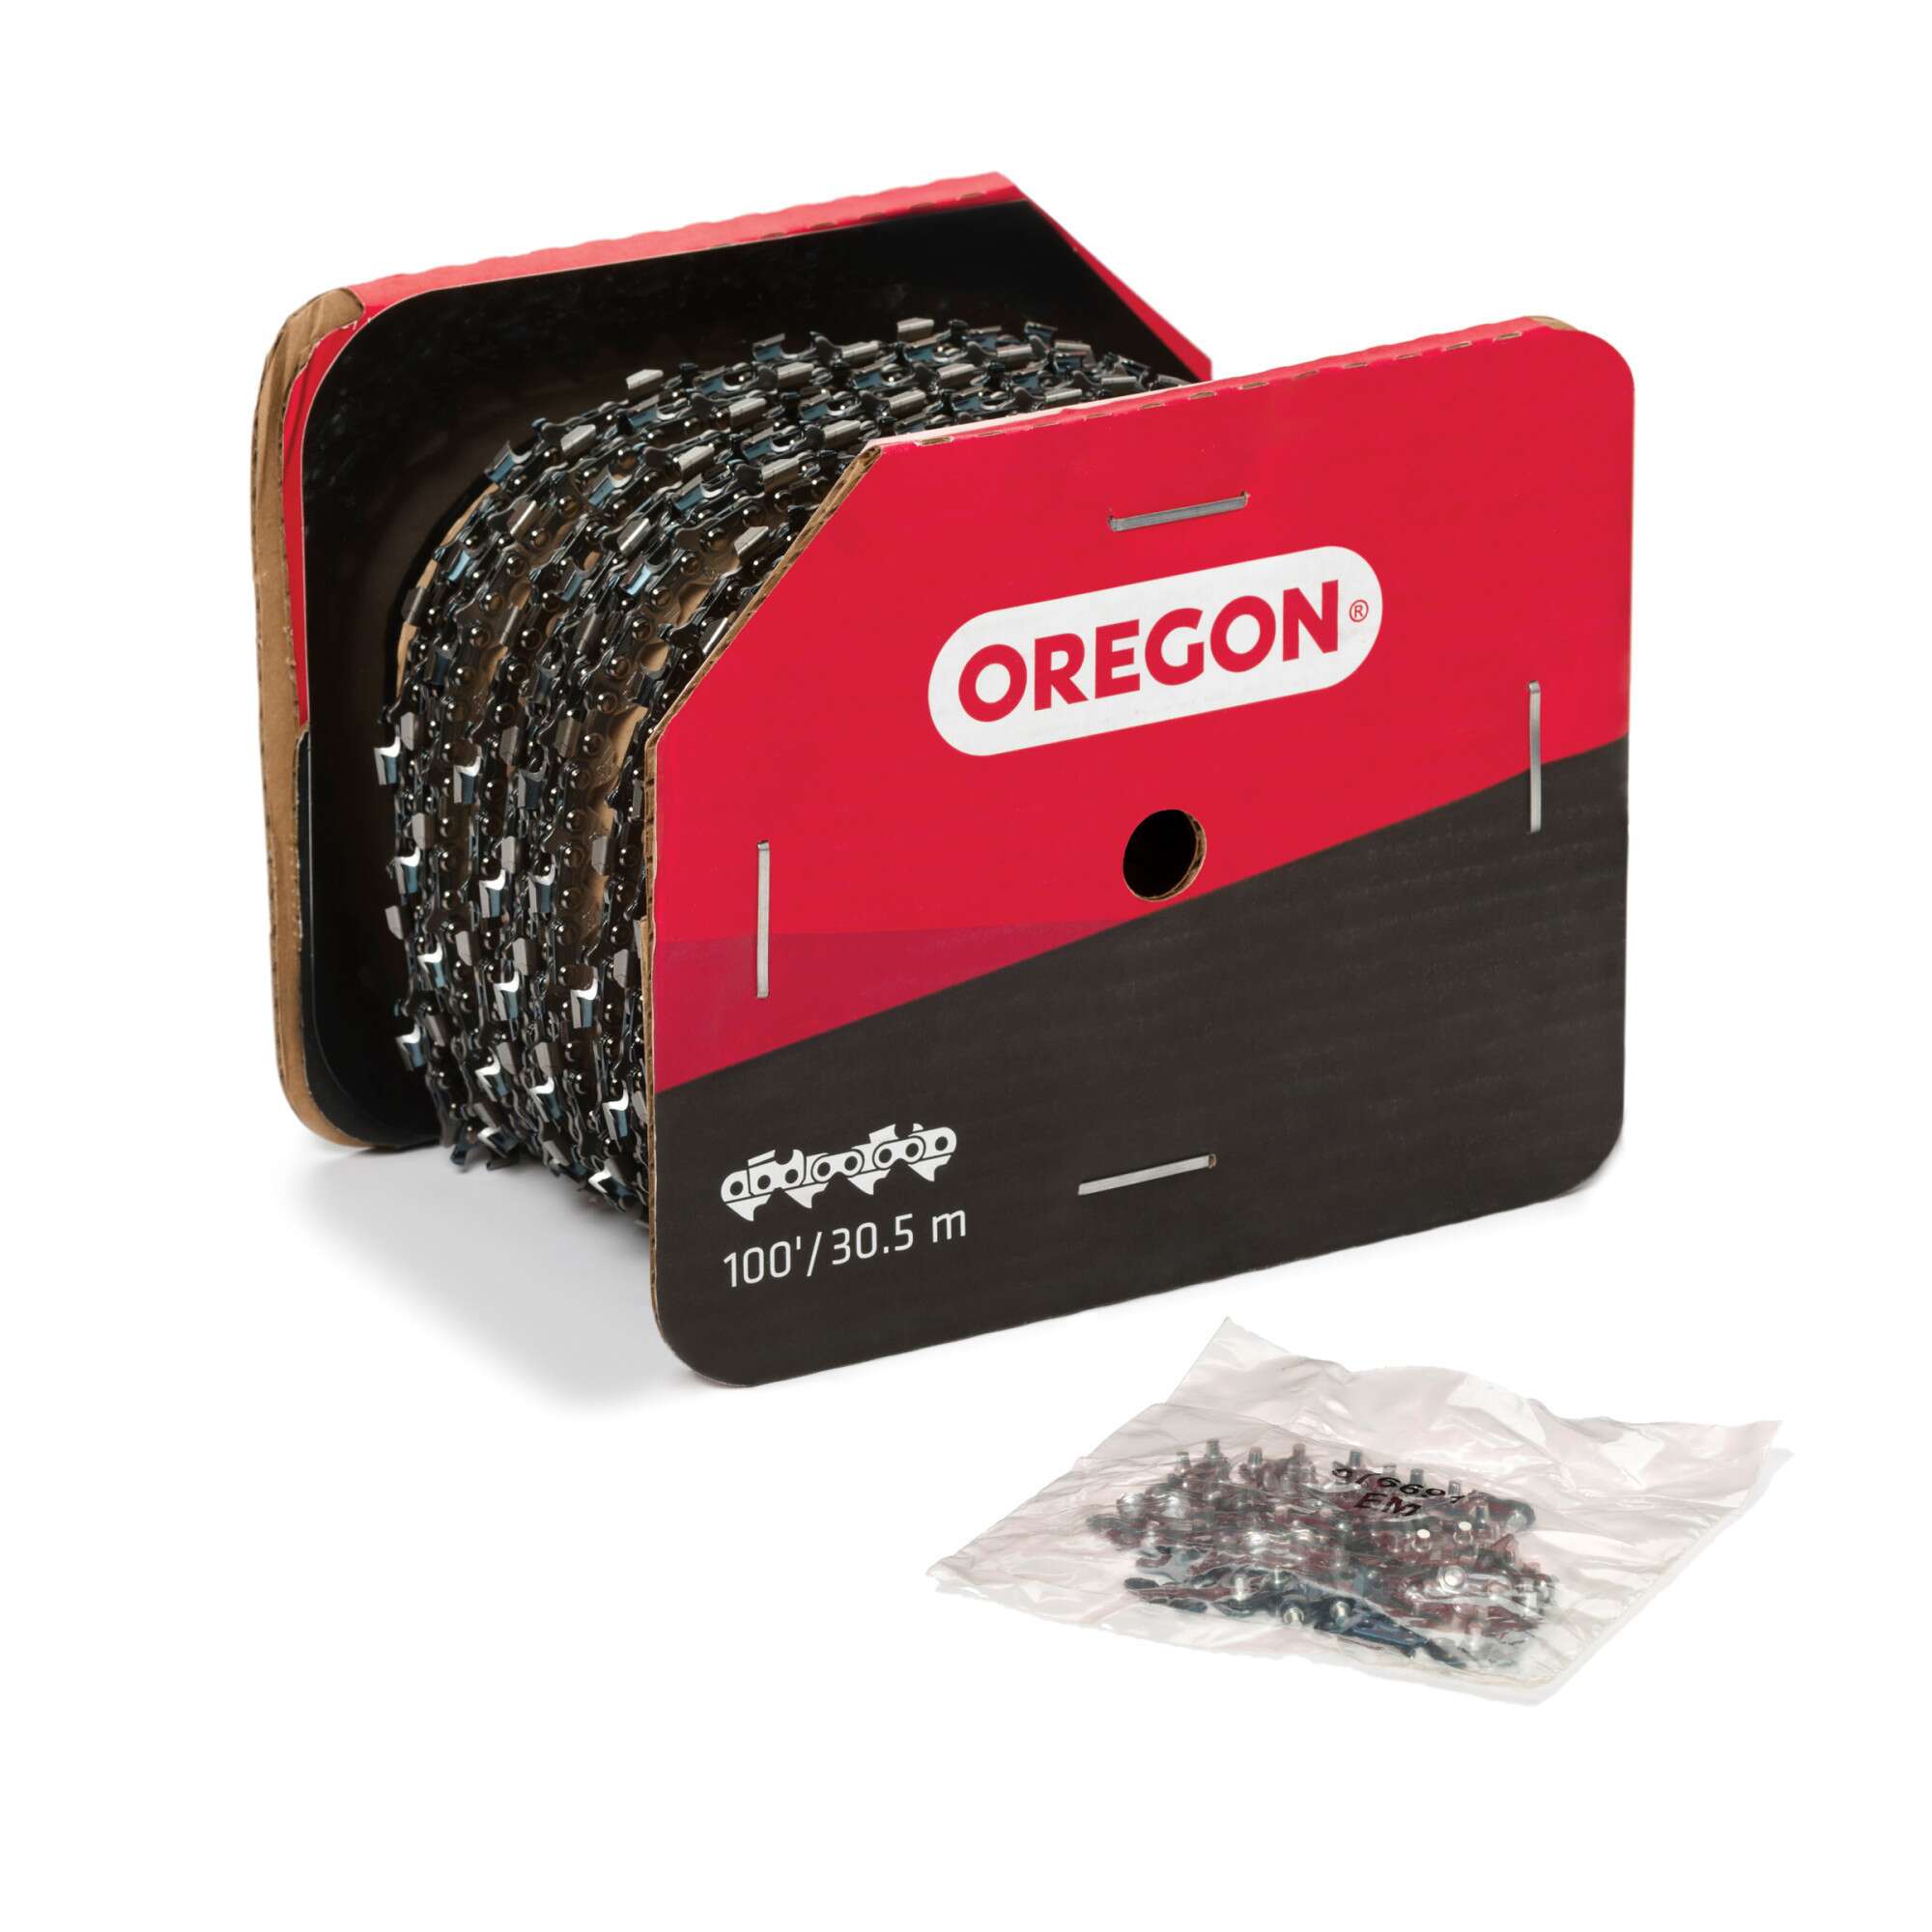 Oregon ControlCut Chainsaw Chain Length 100 ft Chain Pitch 0325 in Chain Gauge 0058 in